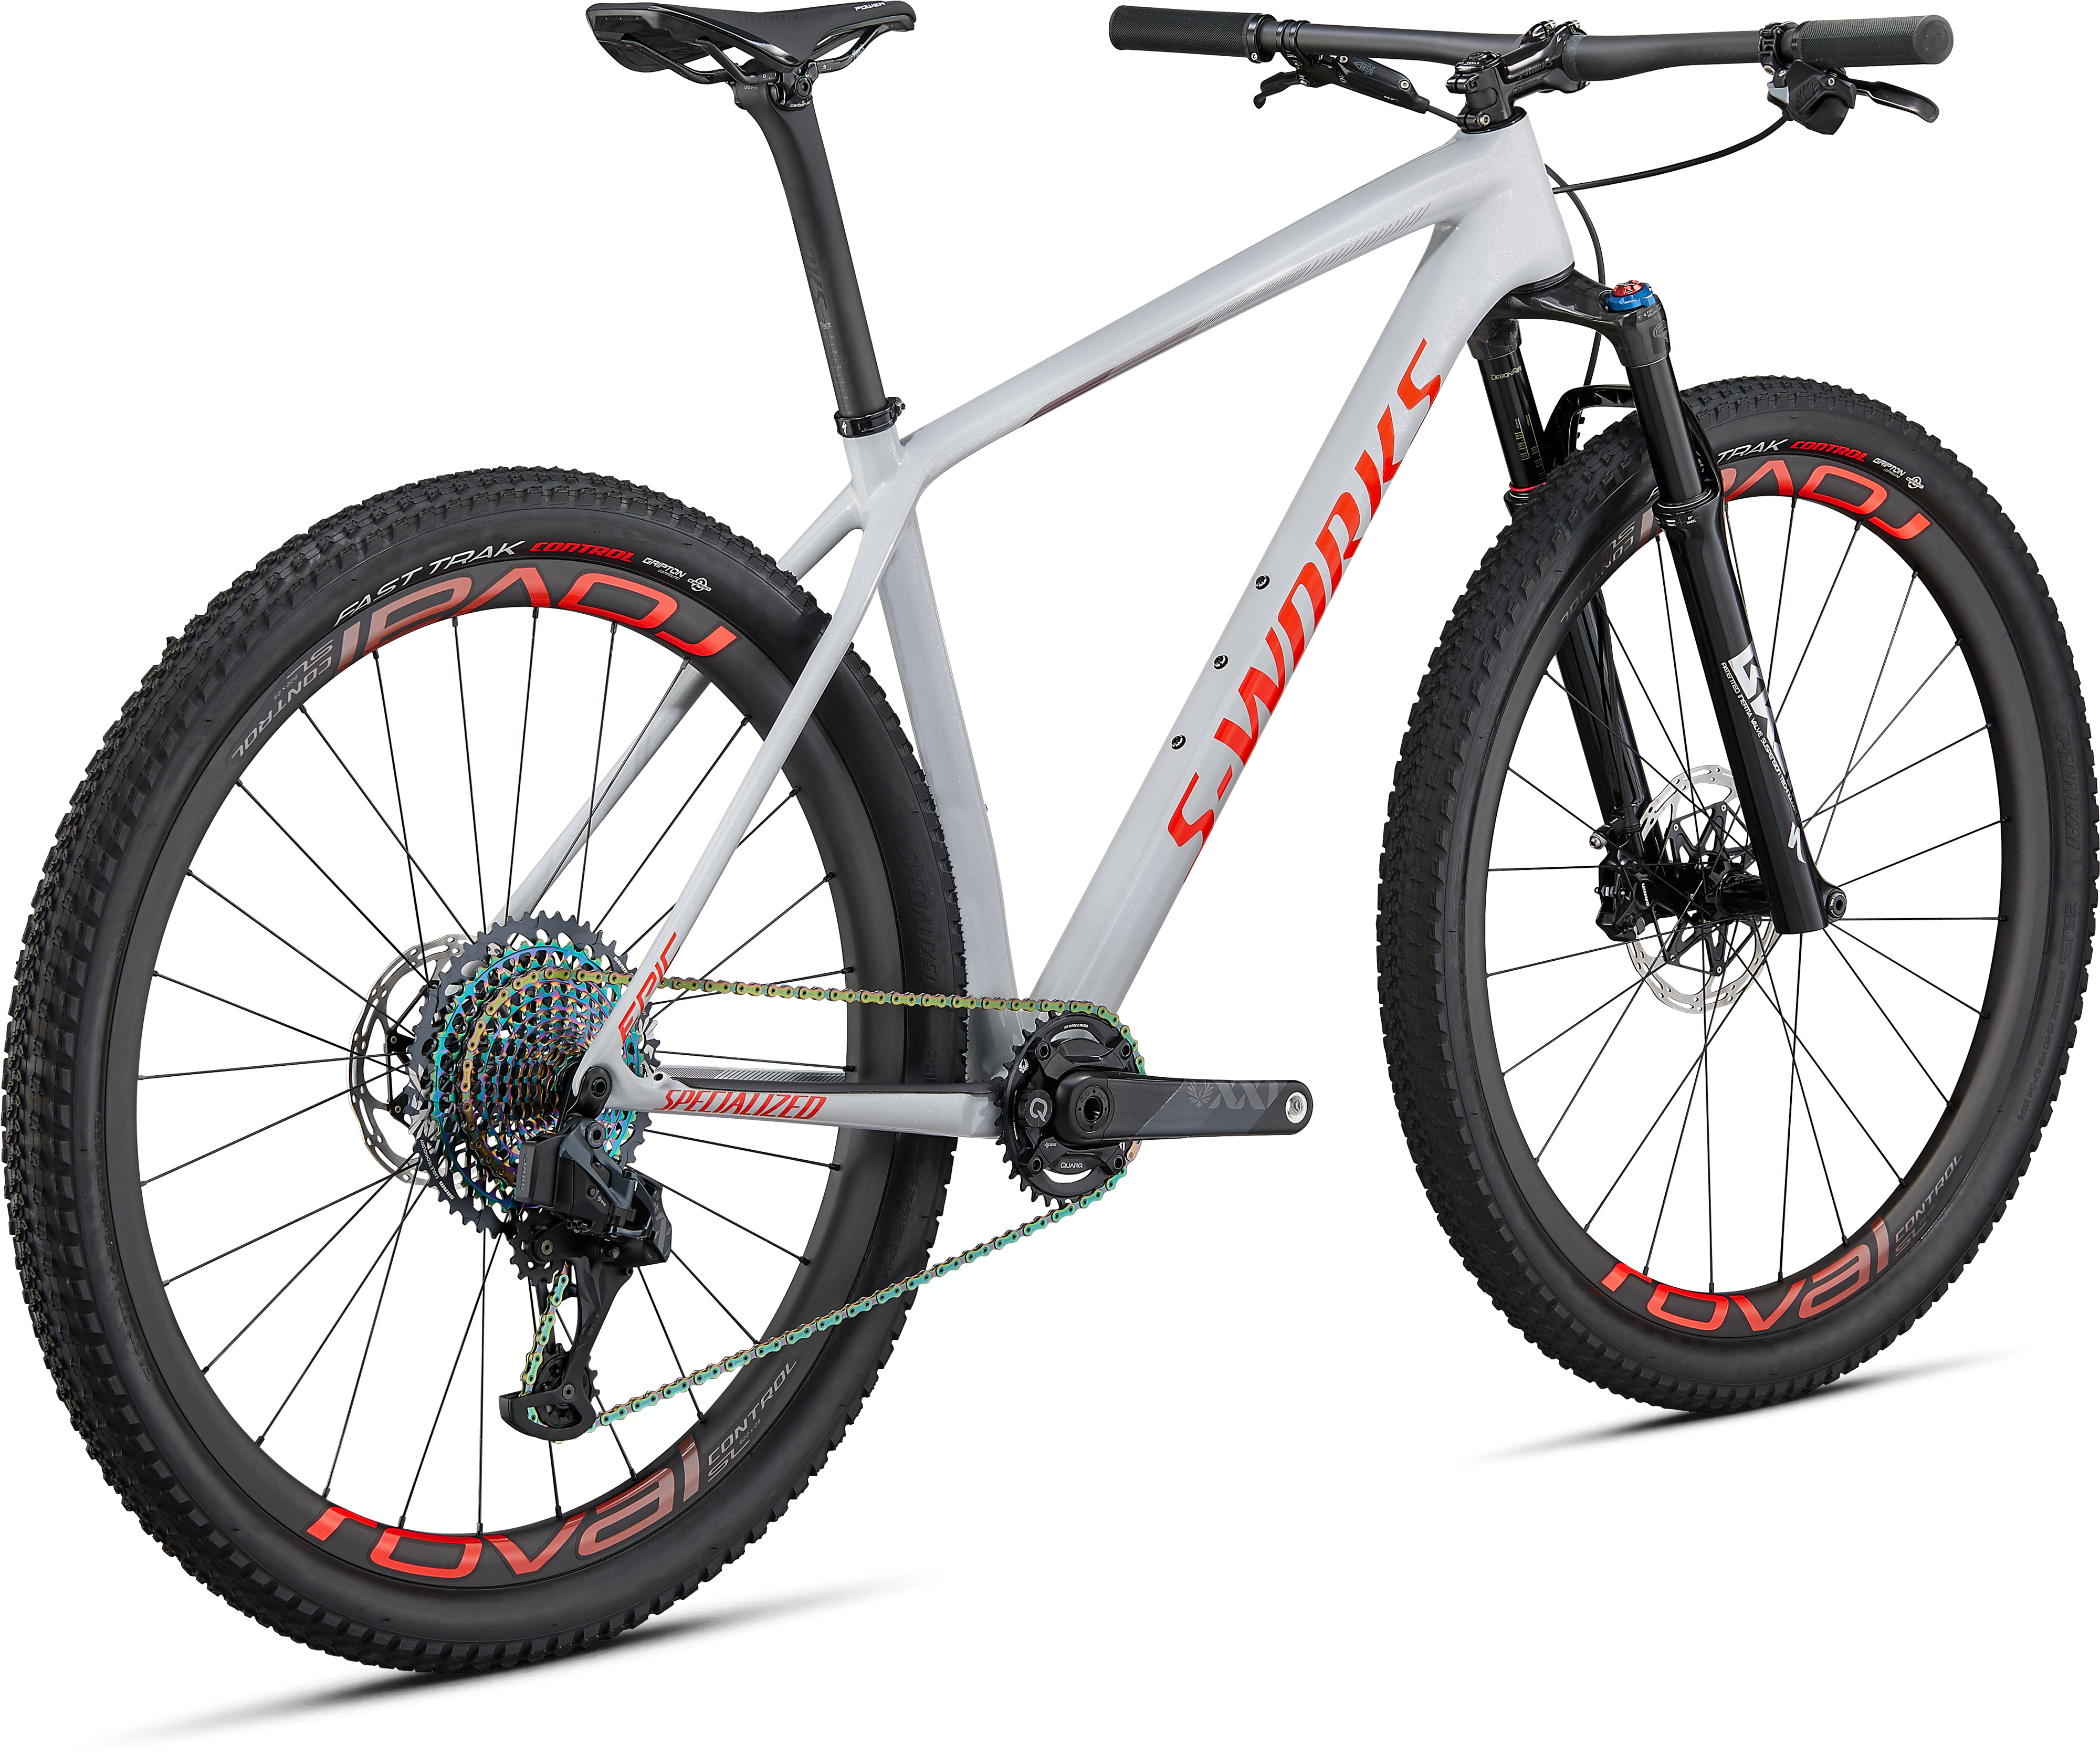 S-Works Epic Hardtail